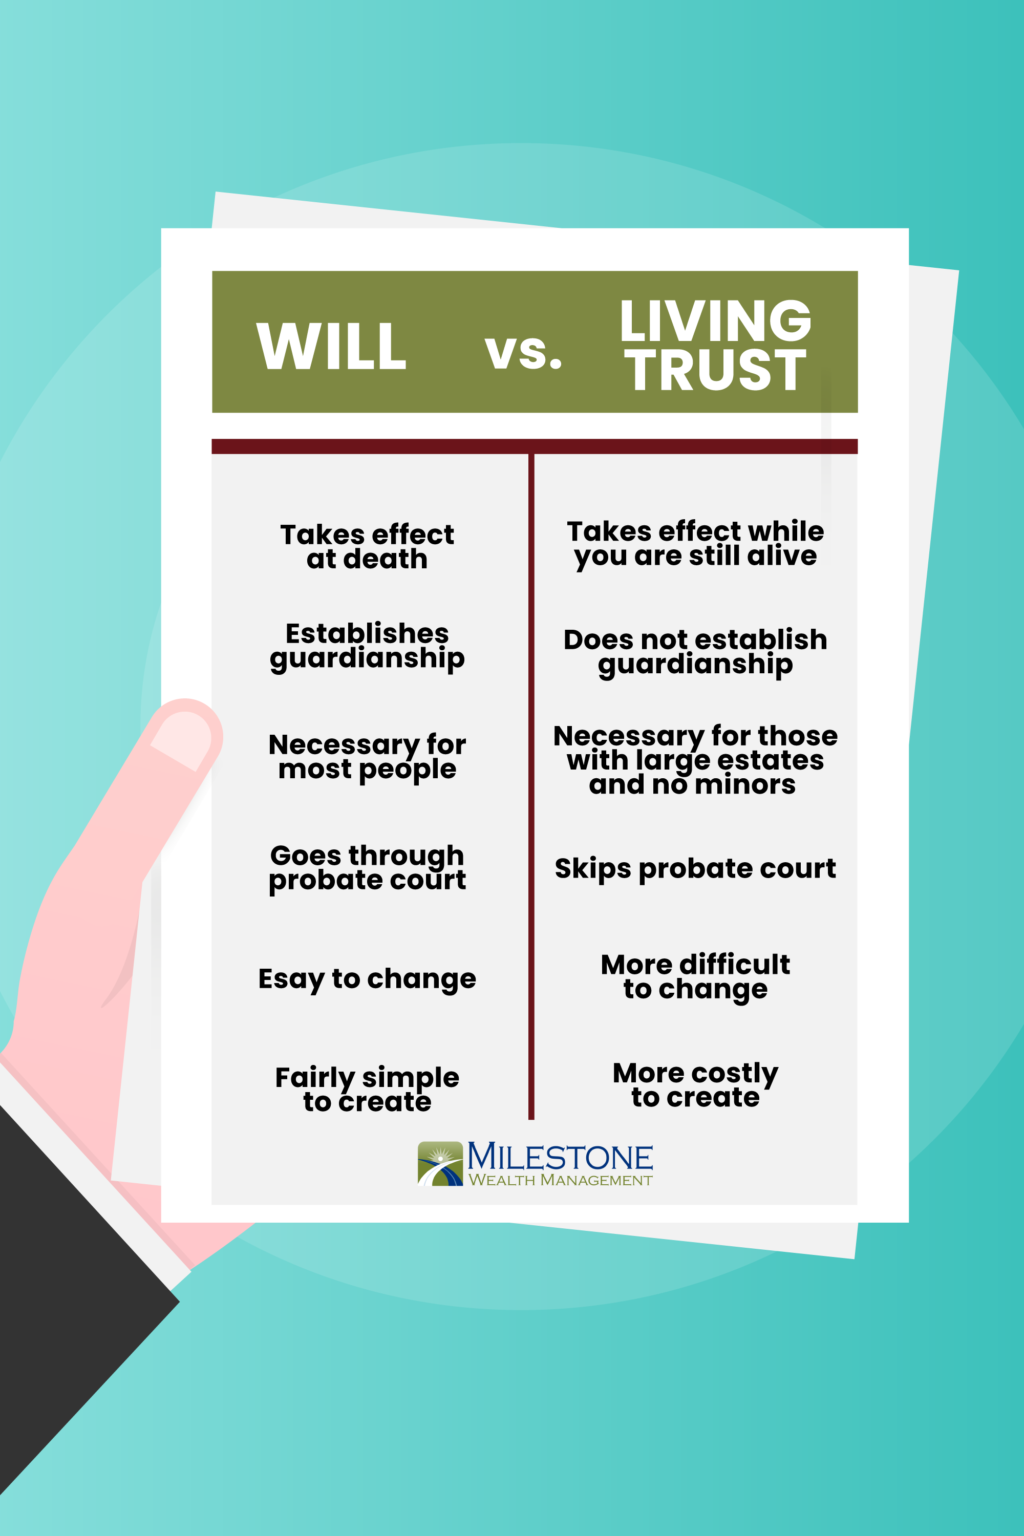 a-will-versus-a-living-trust-milestone-wealth-management